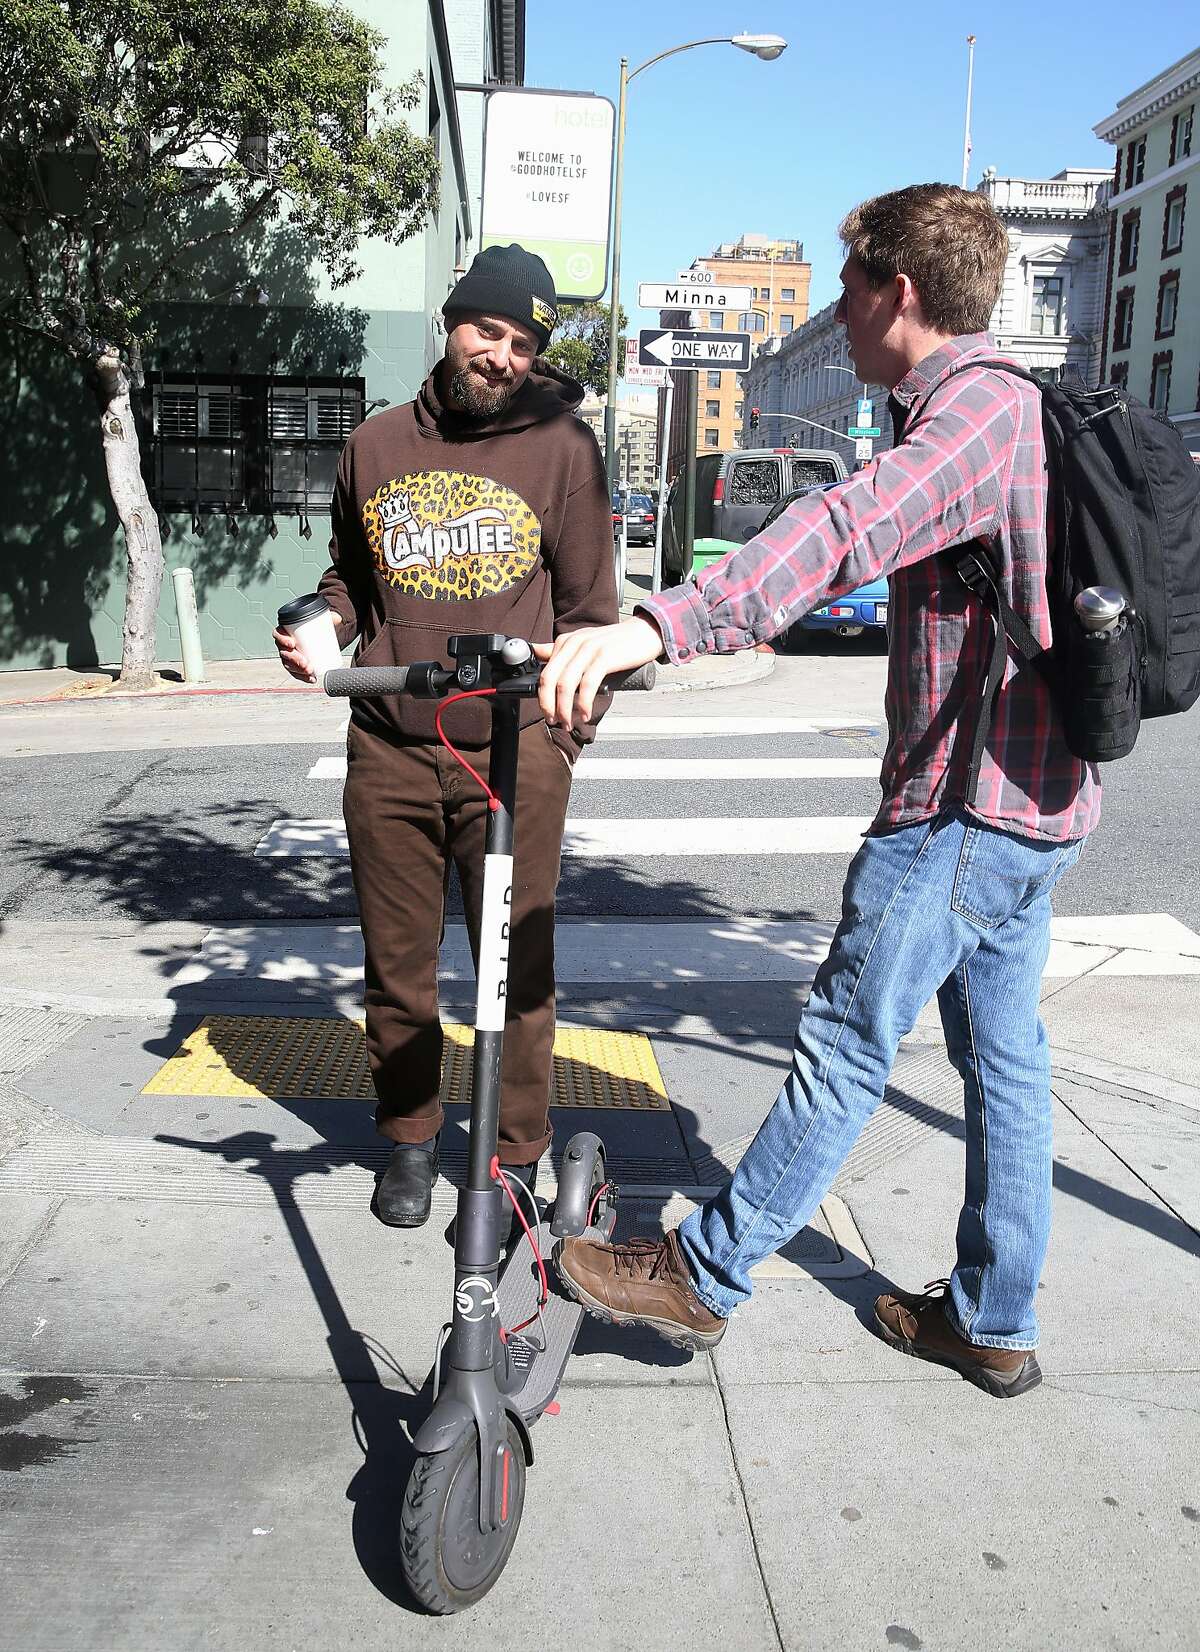 Adam Mesnick (left) who has sandwich shops in his neighborhood talks with Drew Lazzeri (right) riding a scooter on 7th Street on Friday, April 20, 2018, in San Francisco, Calif.